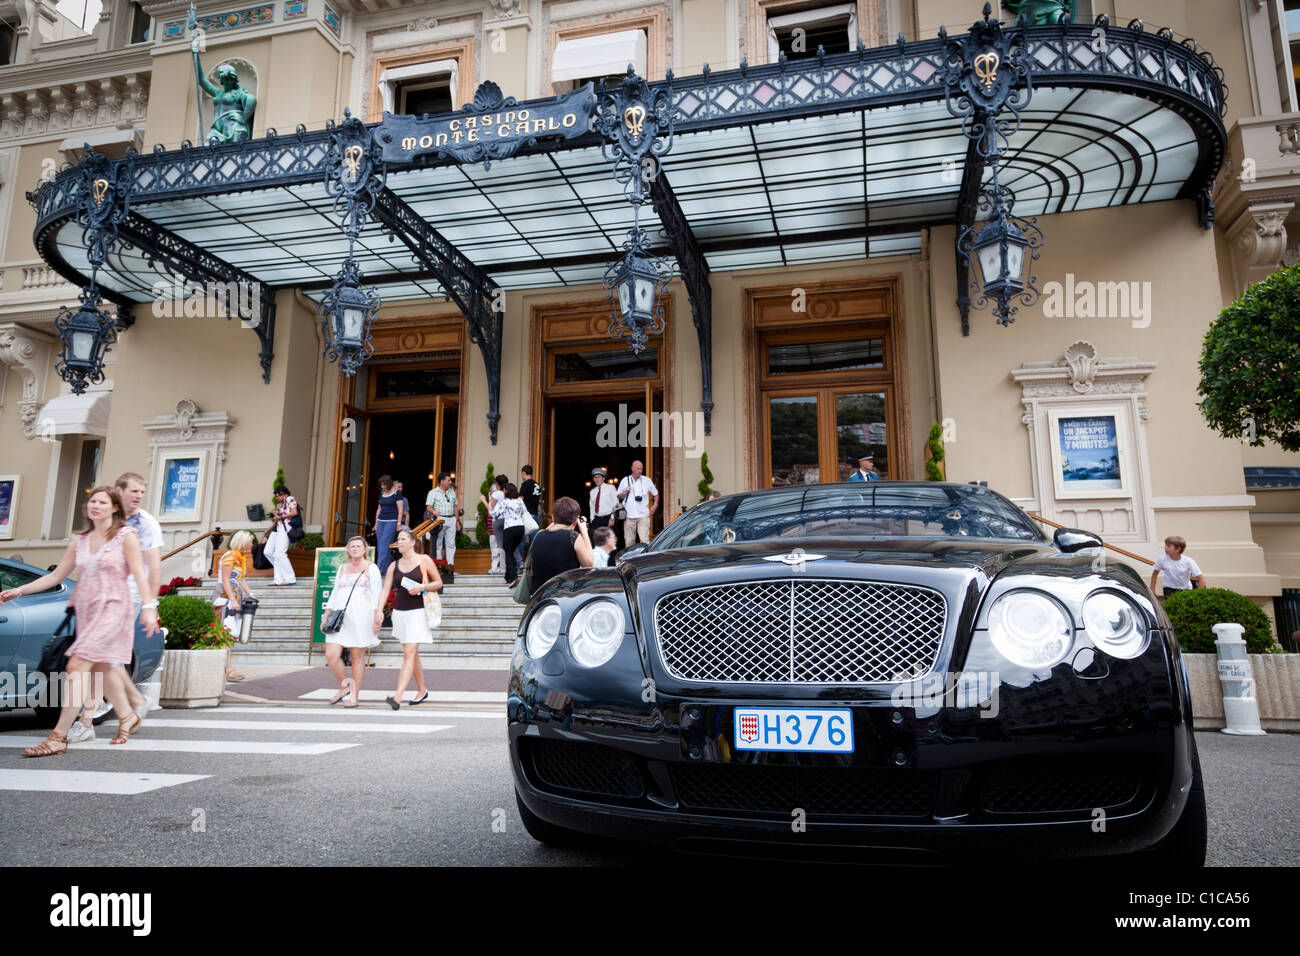 Tourists come and go through the front entrance to the Casino in Monte-Carlo, complete with an expensive Bentley parked outside. Stock Photo